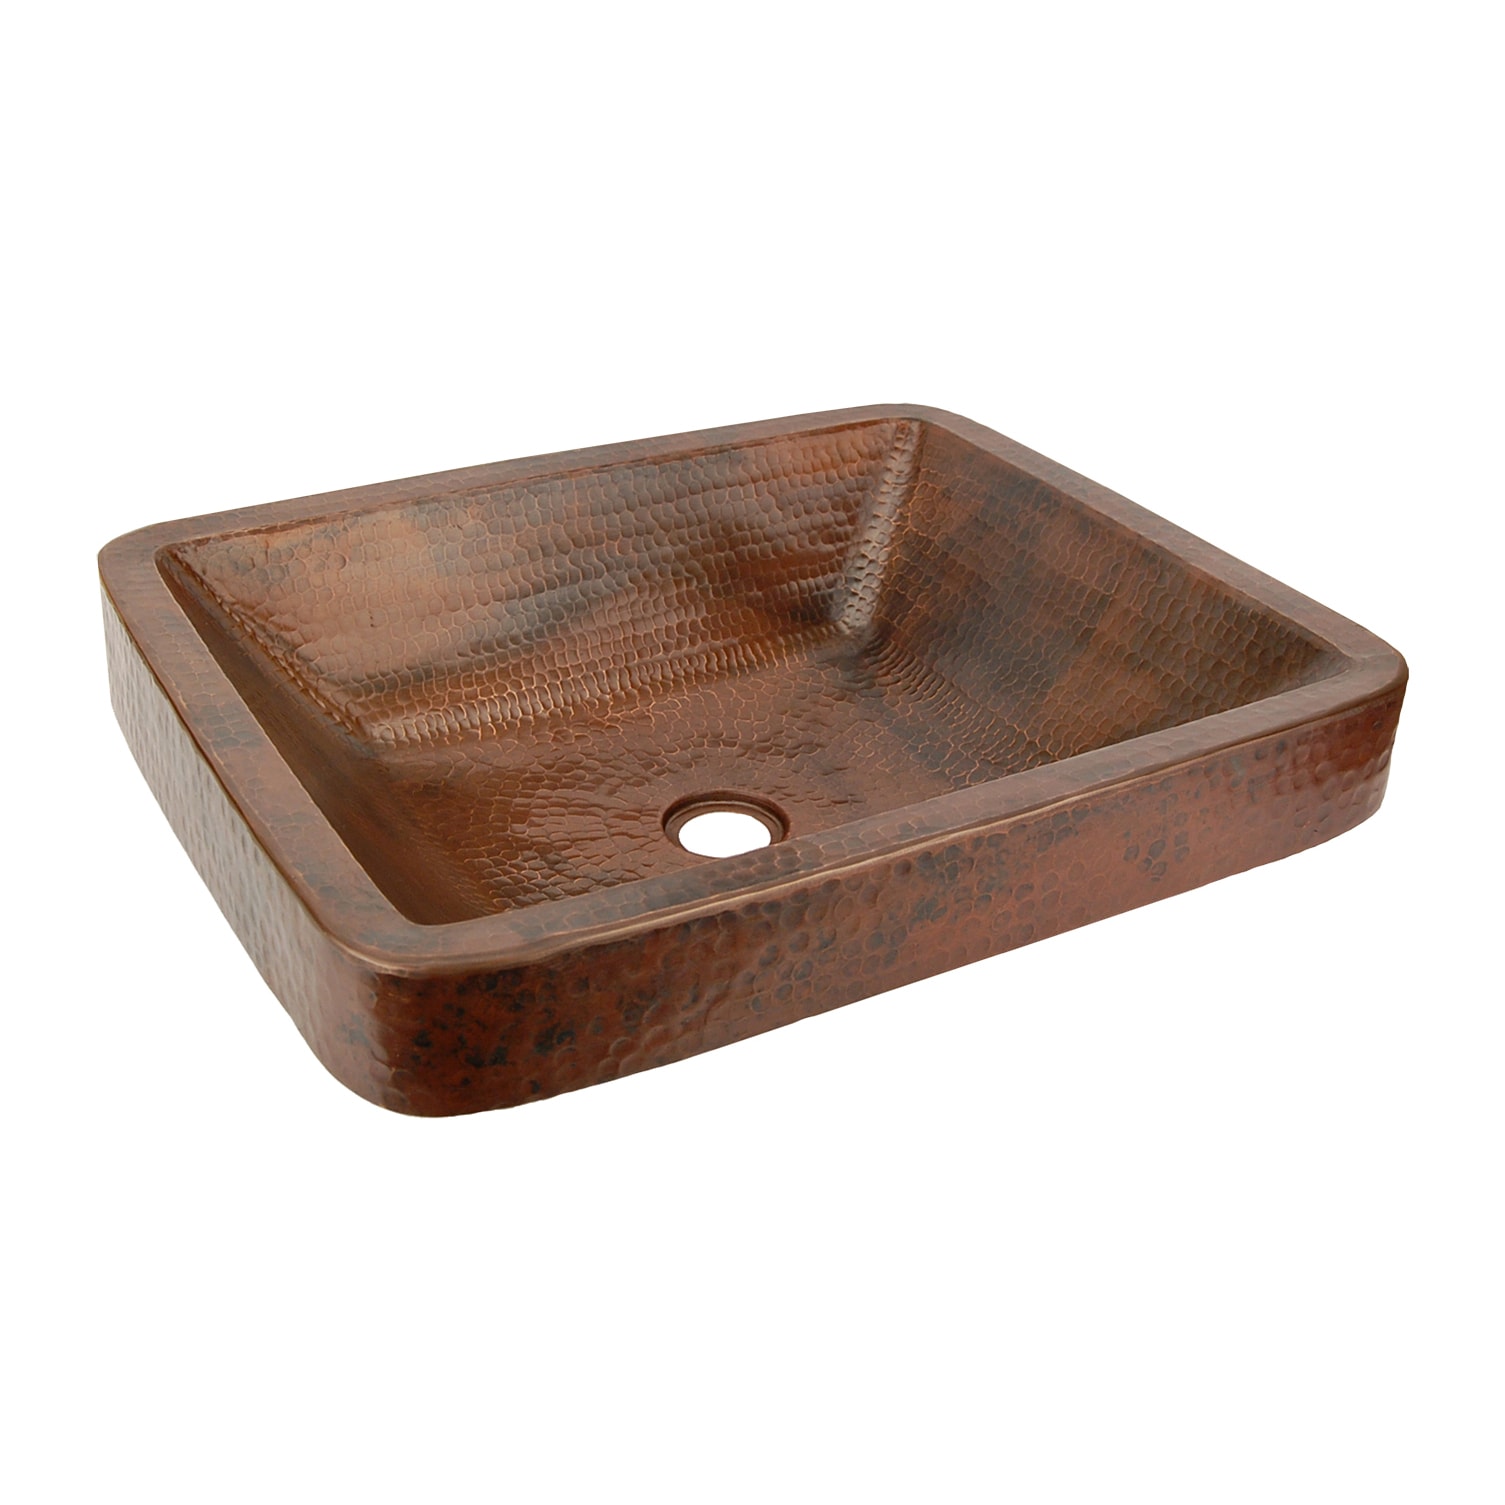 Premier Copper Products Rectangle Skirted Vessel Hammered Copper Sink Overstock Com Shopping The Best Deals On Bathroom Sinks